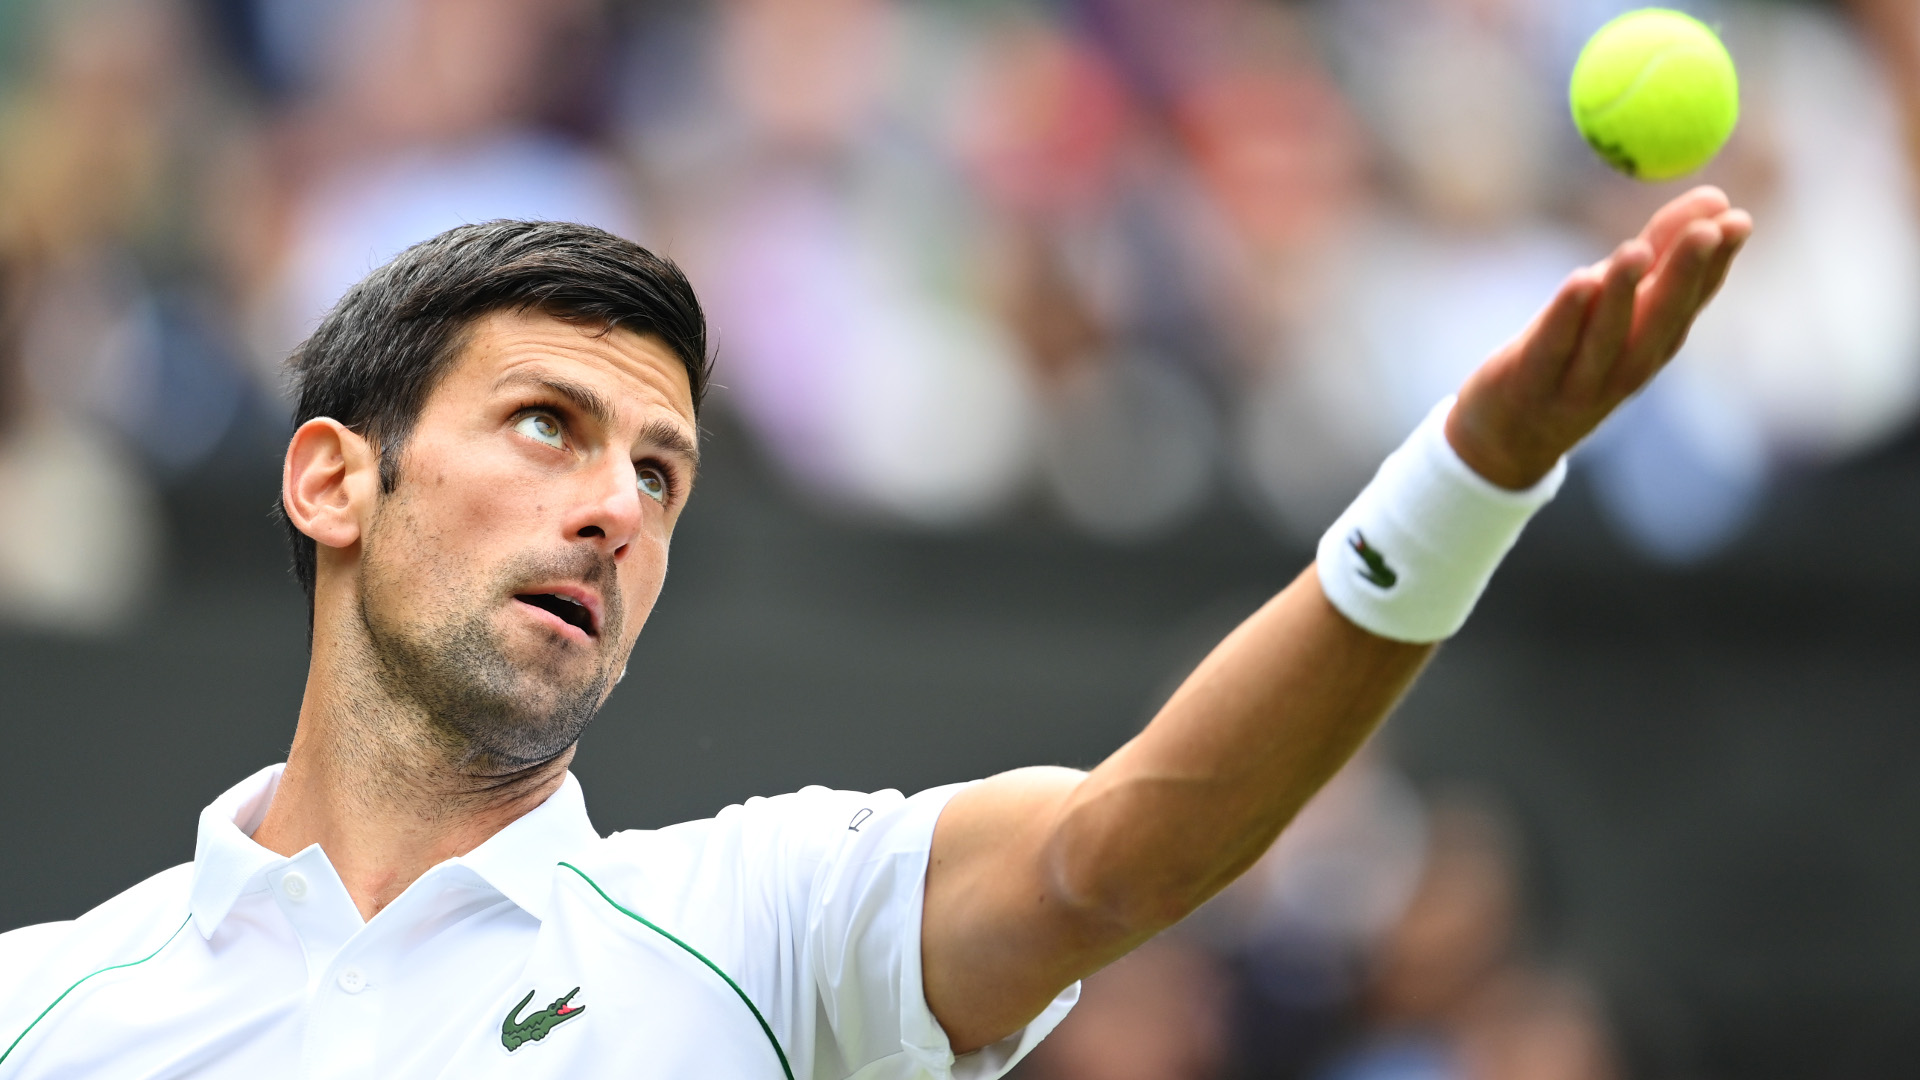 Djokovic eases into third round with dominant beIN SPORTS